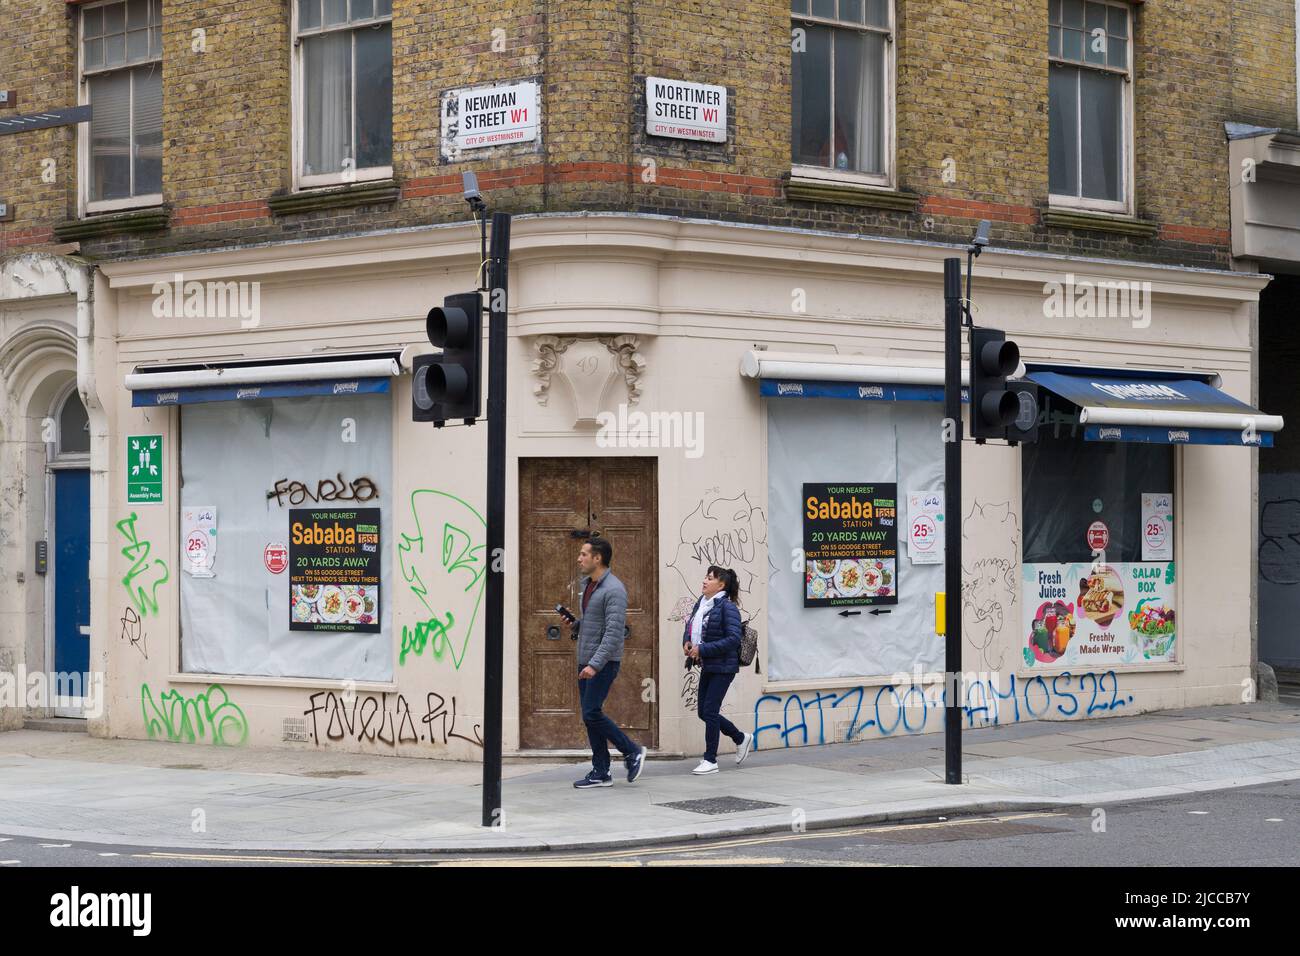 Pedestrians outside closed down and boarded up sandwich shop, Mortimer Street, City of Westminster, London, UK.  5 Jun 2022 Stock Photo